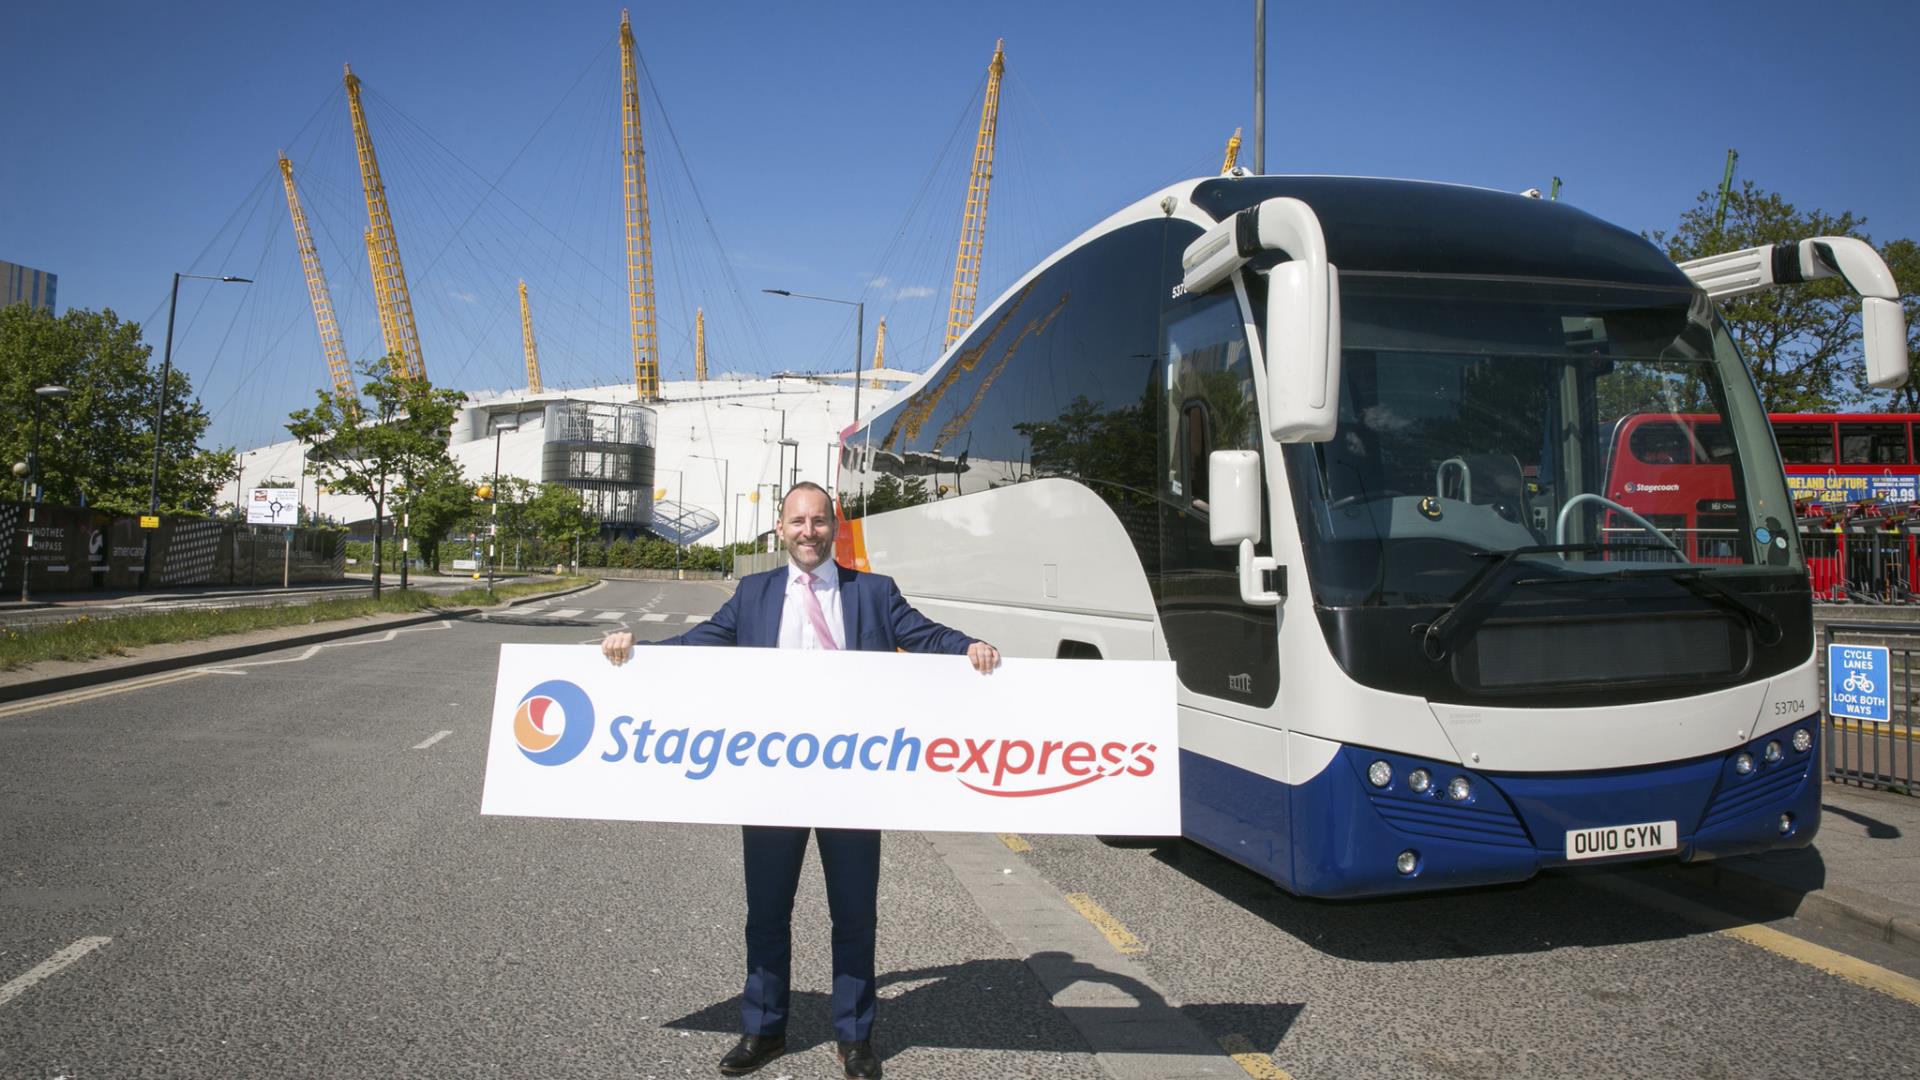 A man holds a sign for Stagecoach in front of a coach with The O2 in the background on Greenwich Peninsula.